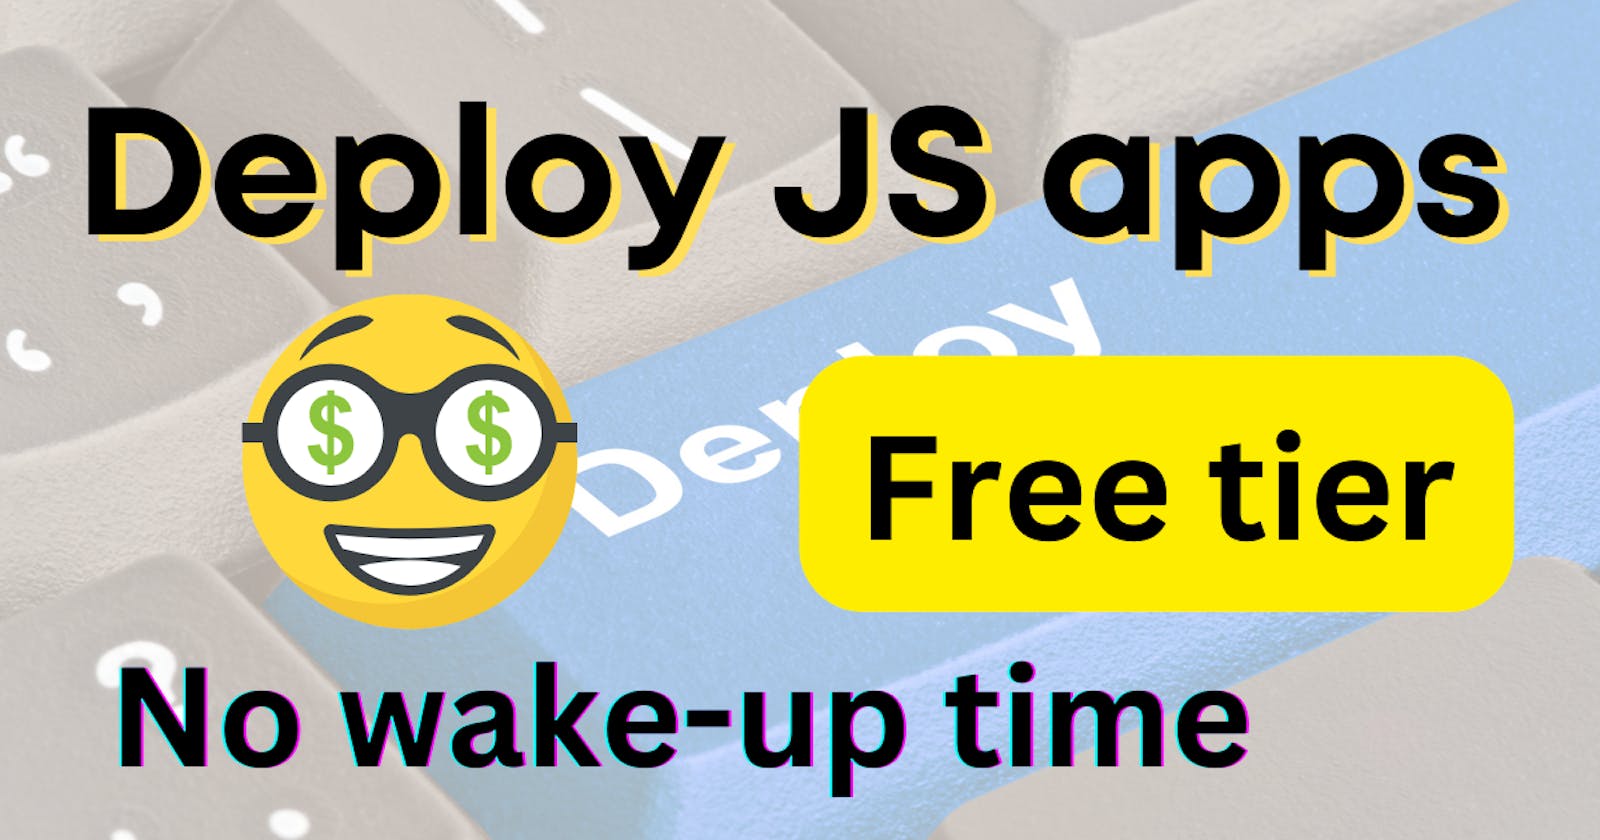 Quickly deploy JS apps with Cyclic. A free tier with no wake-up time... 🤑🤩